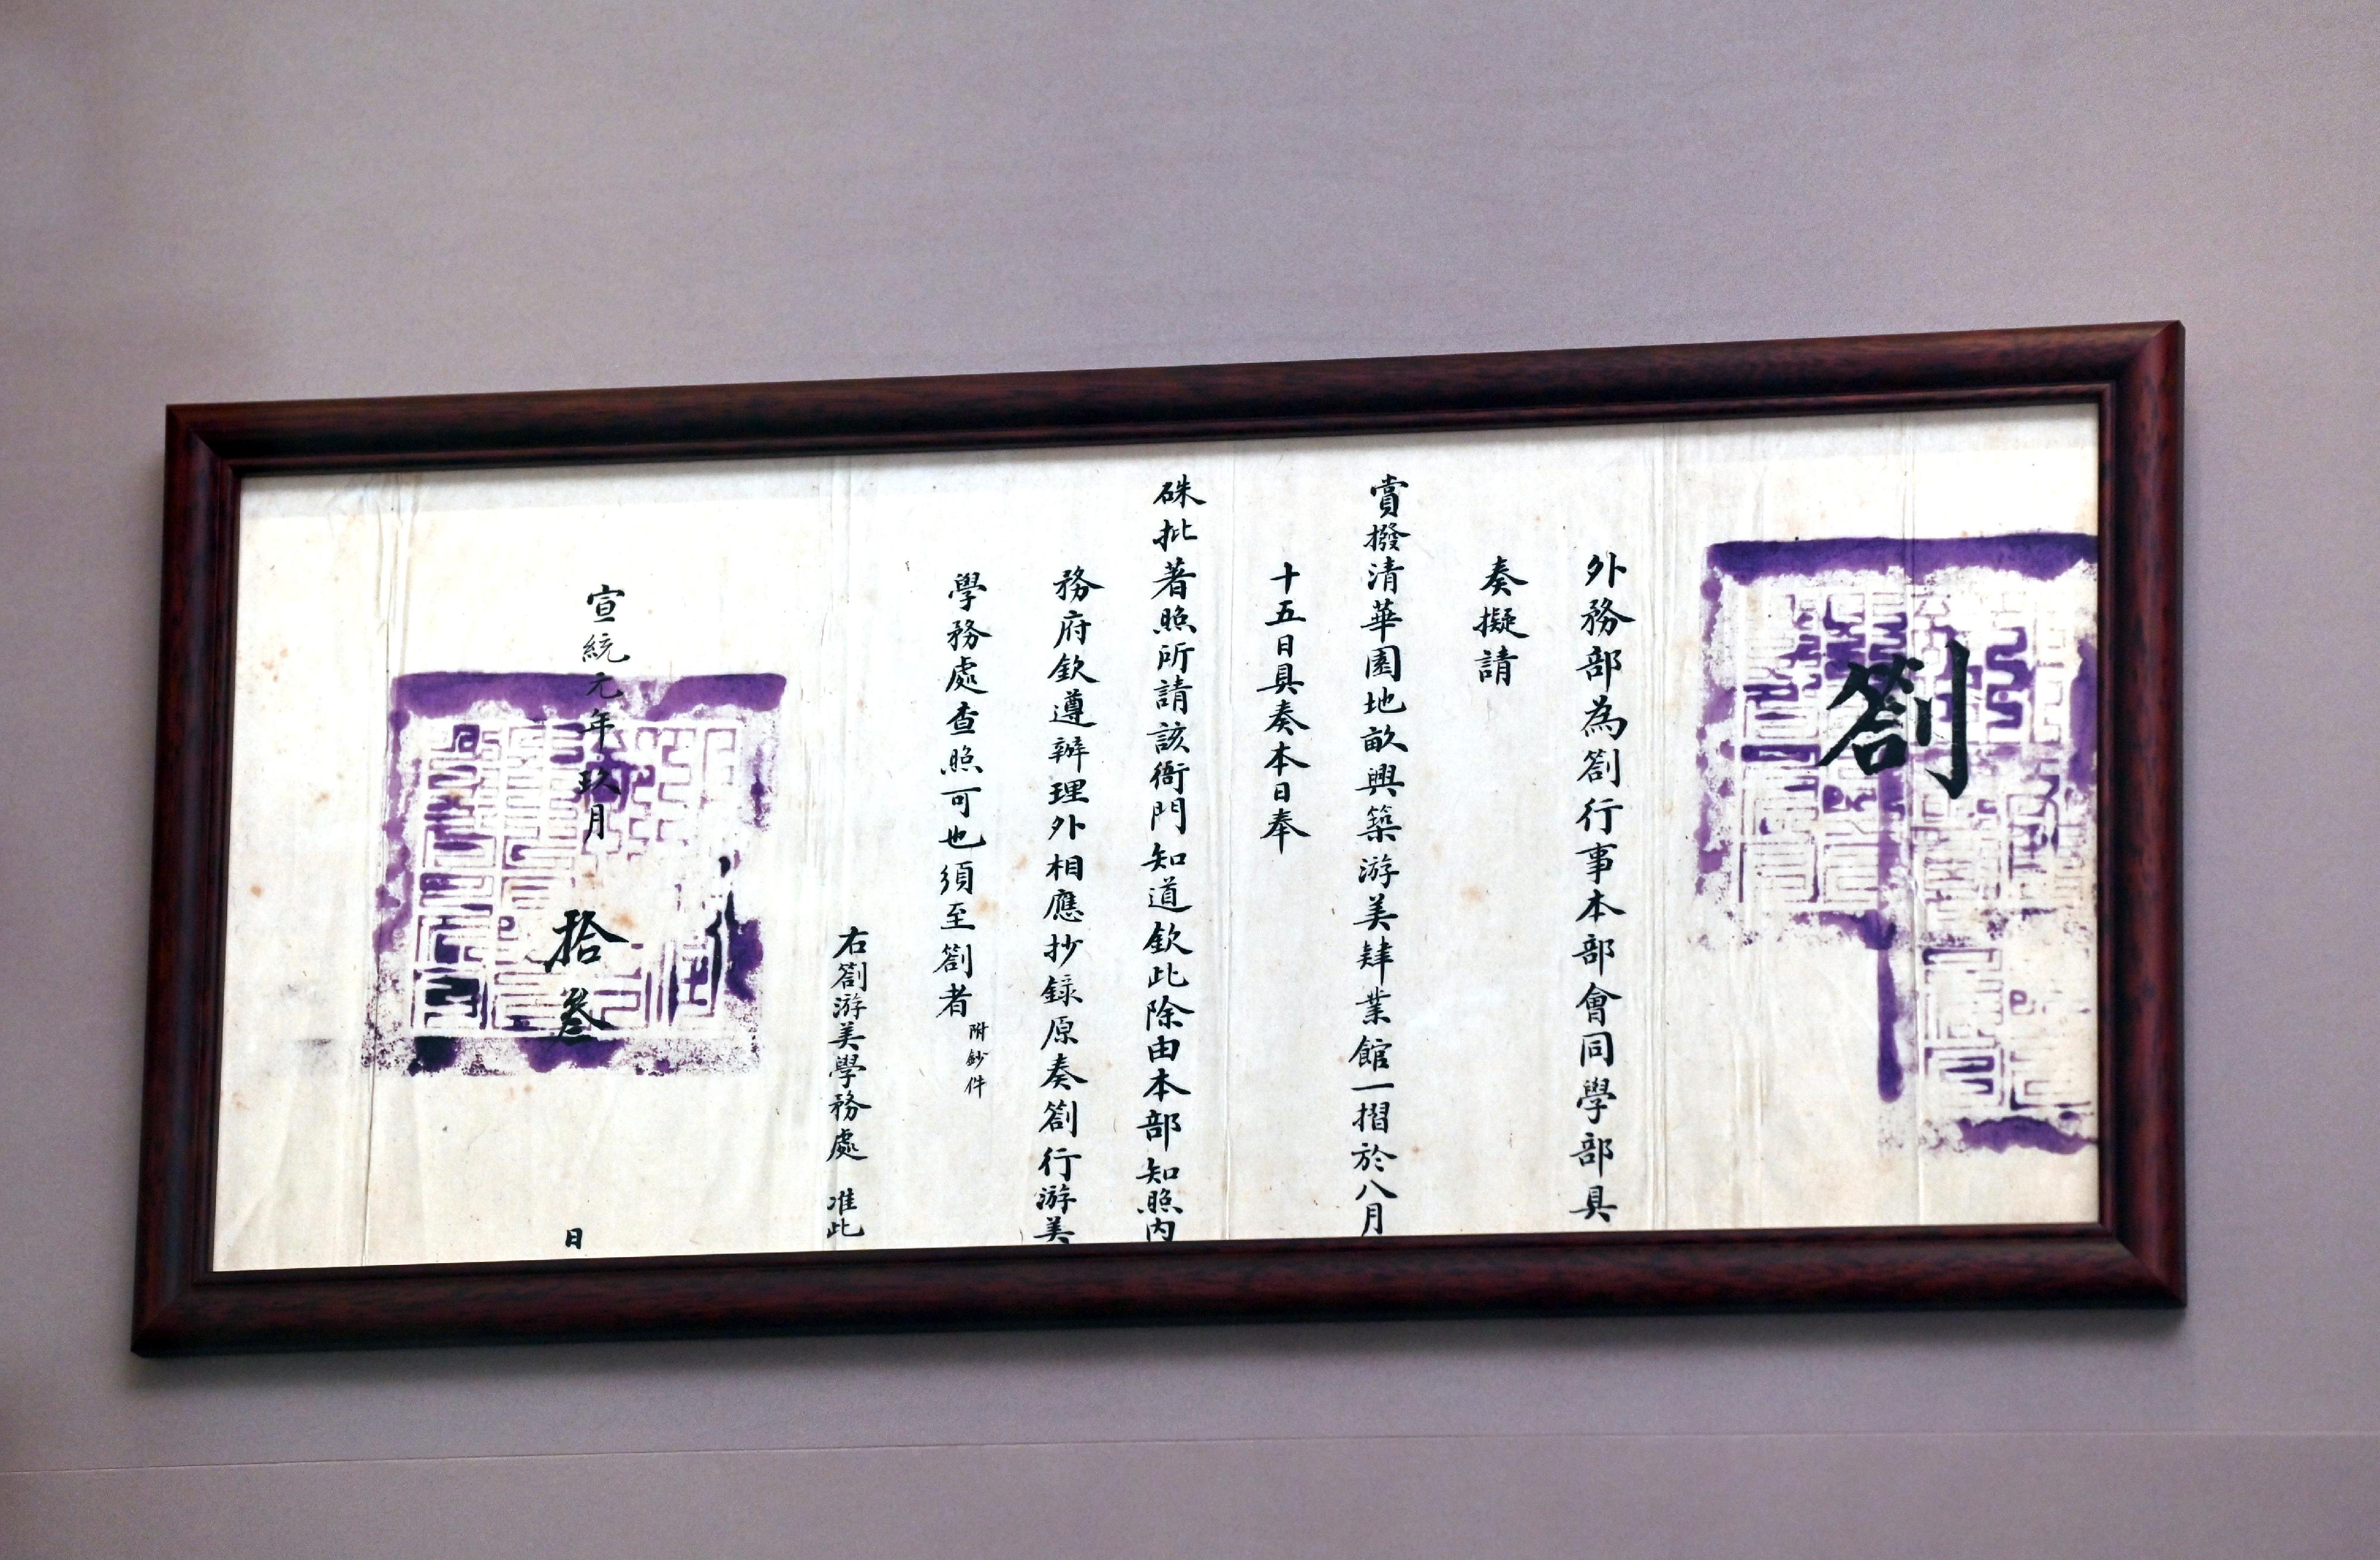 The "Self-discipline and Social Commitment: People and Stories of Tsinghua University" Special Exhibition will run from today (January 26) until May 31 at the Dr Sun Yat-sen Museum. Photo shows the directive approving the funding to establish in Tsinghua Garden the preparatory school for students to study in the US in 1909.